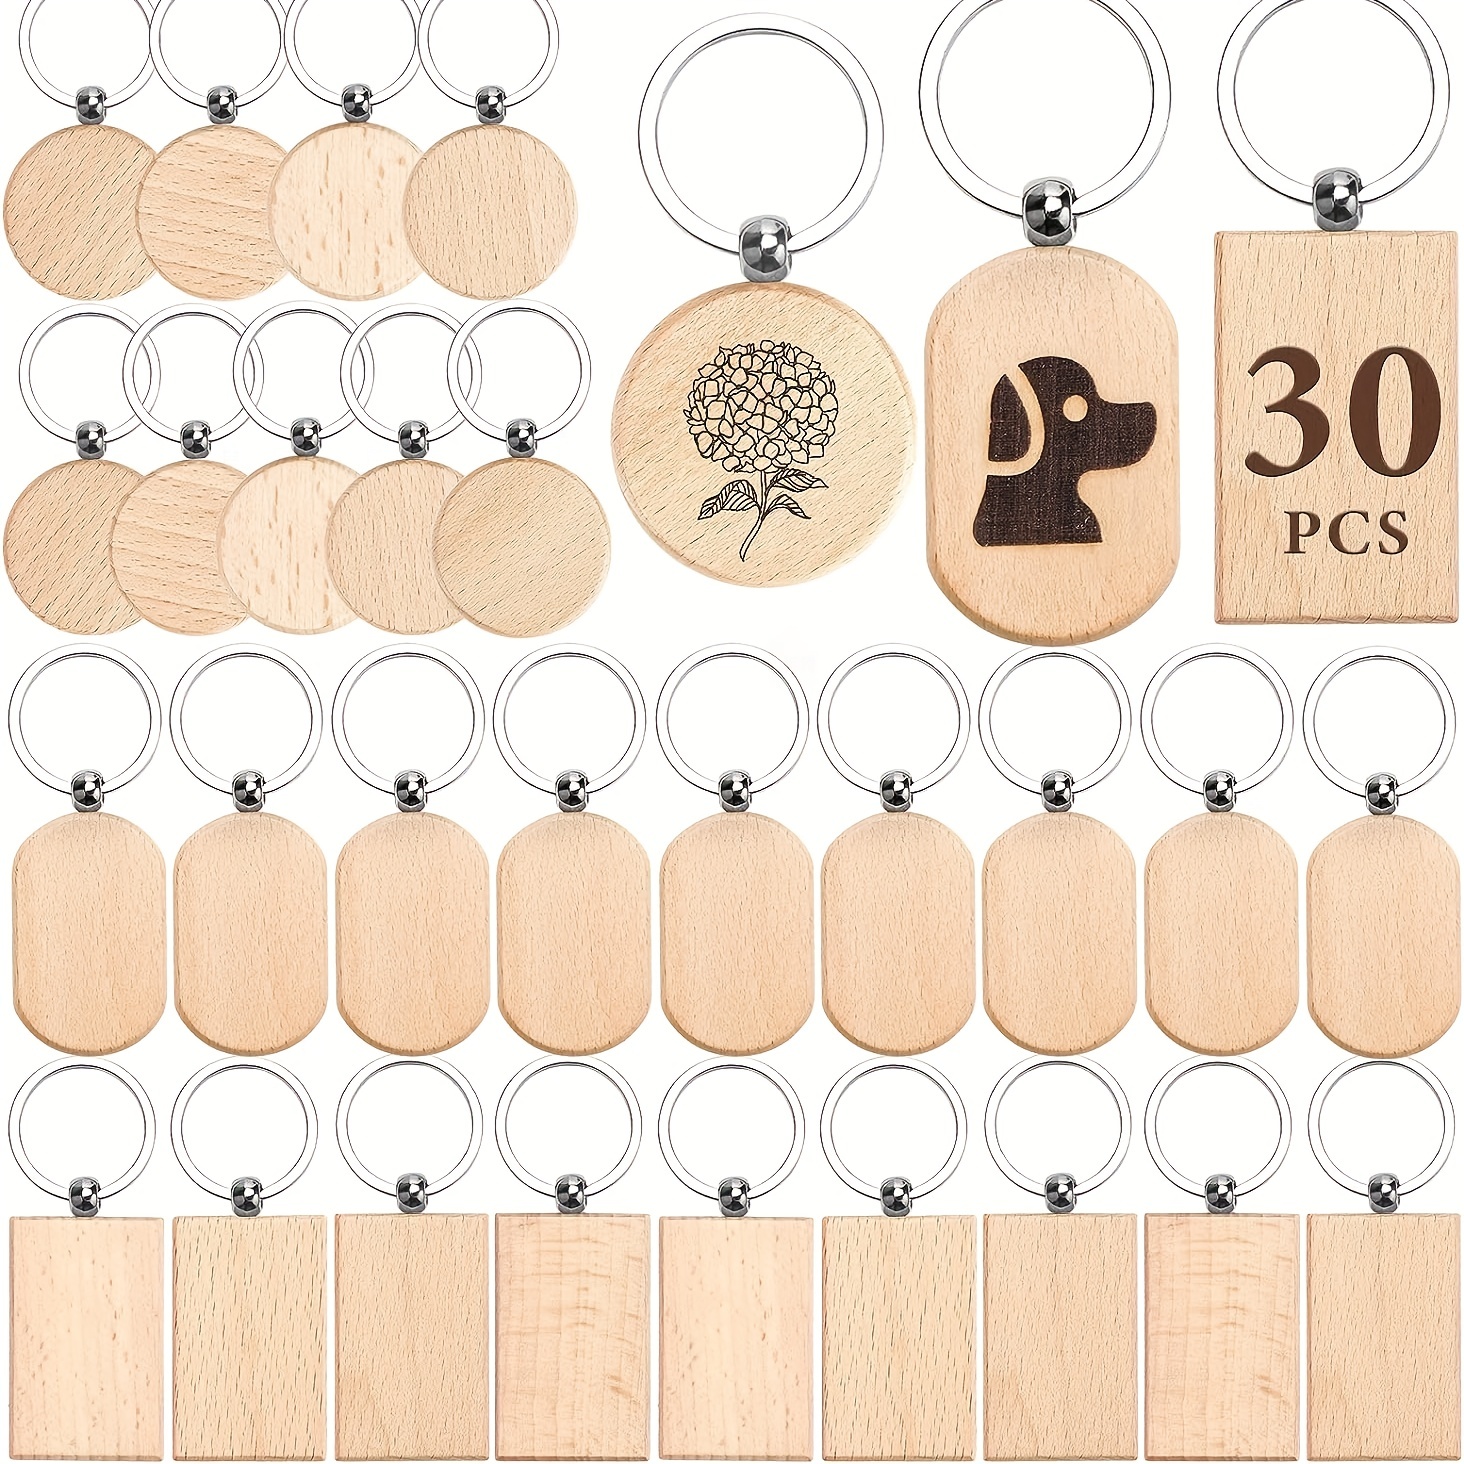 30pcs Hollow Bottom Half Circle Shape Wood Jewelry Accessories, DIY Unfinished Natural Wood Earrings Blanks,Laser Cut Wood Blanks (2)